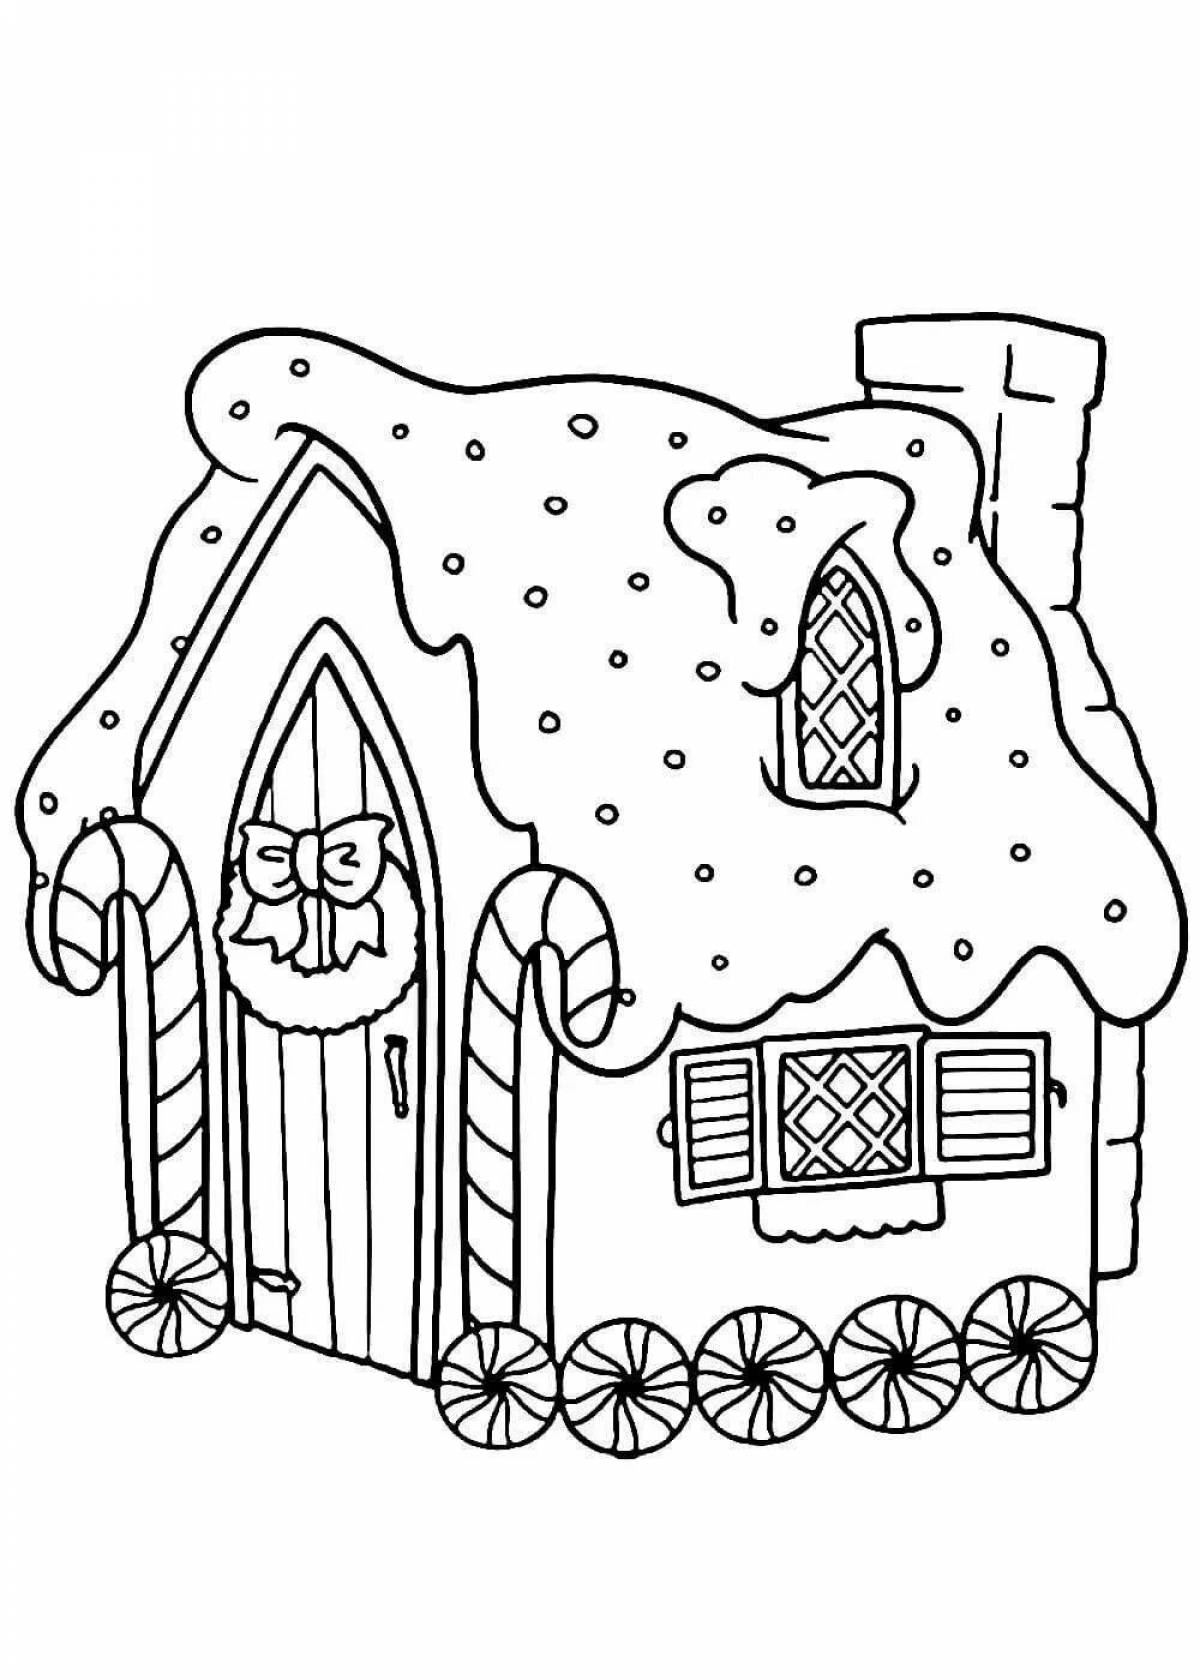 Adorable sweet house coloring page